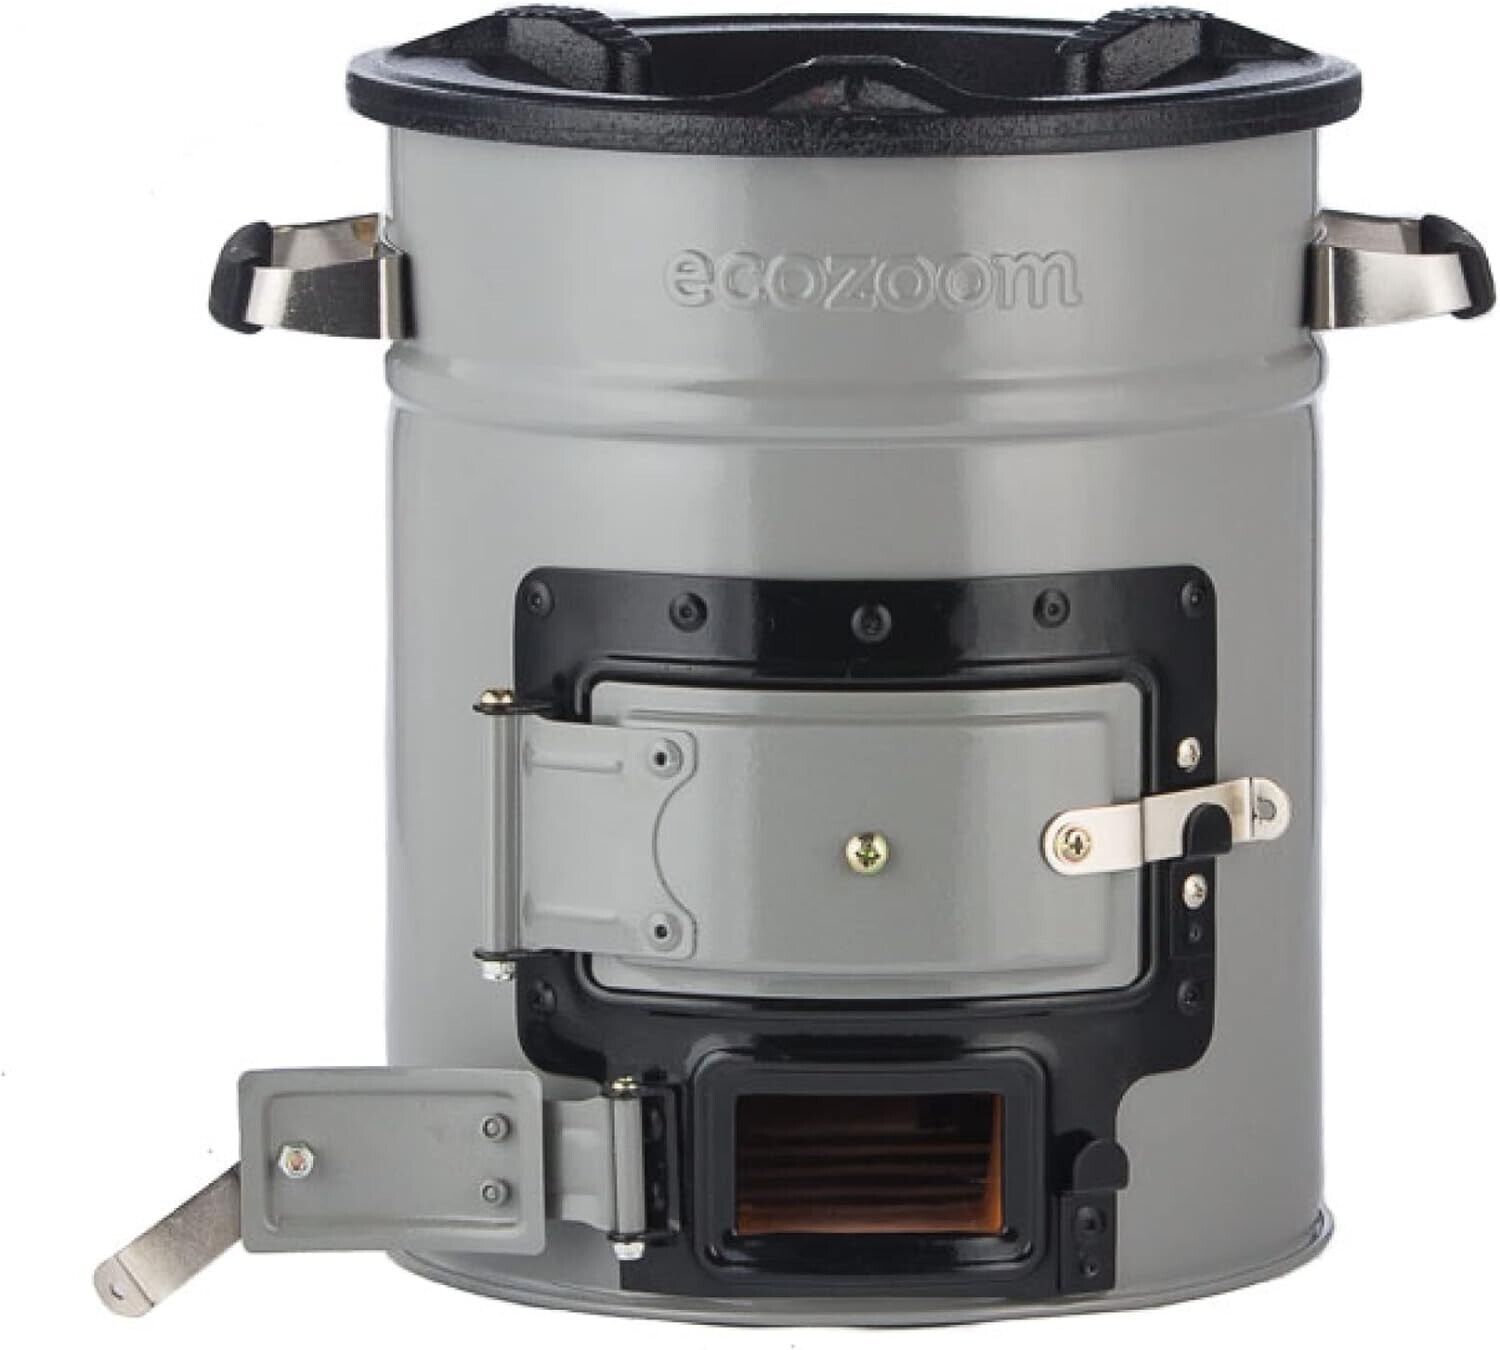 Rocket Stove, Portable Camp Stove for Outdoor Cooking, Versa Dual-Fuel